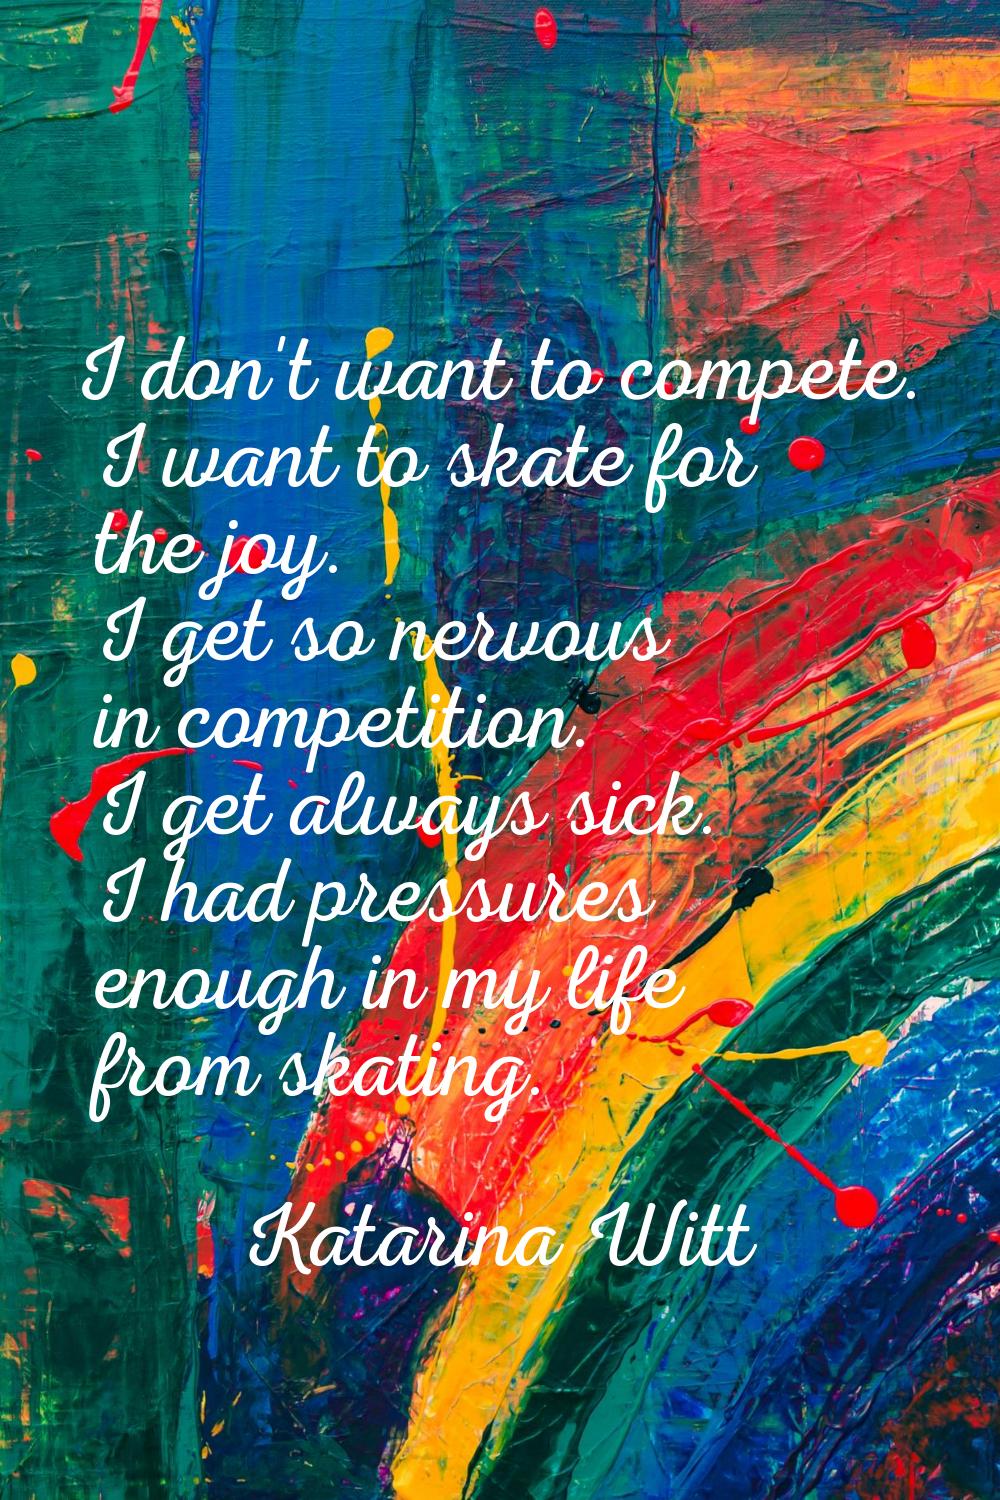 I don't want to compete. I want to skate for the joy. I get so nervous in competition. I get always